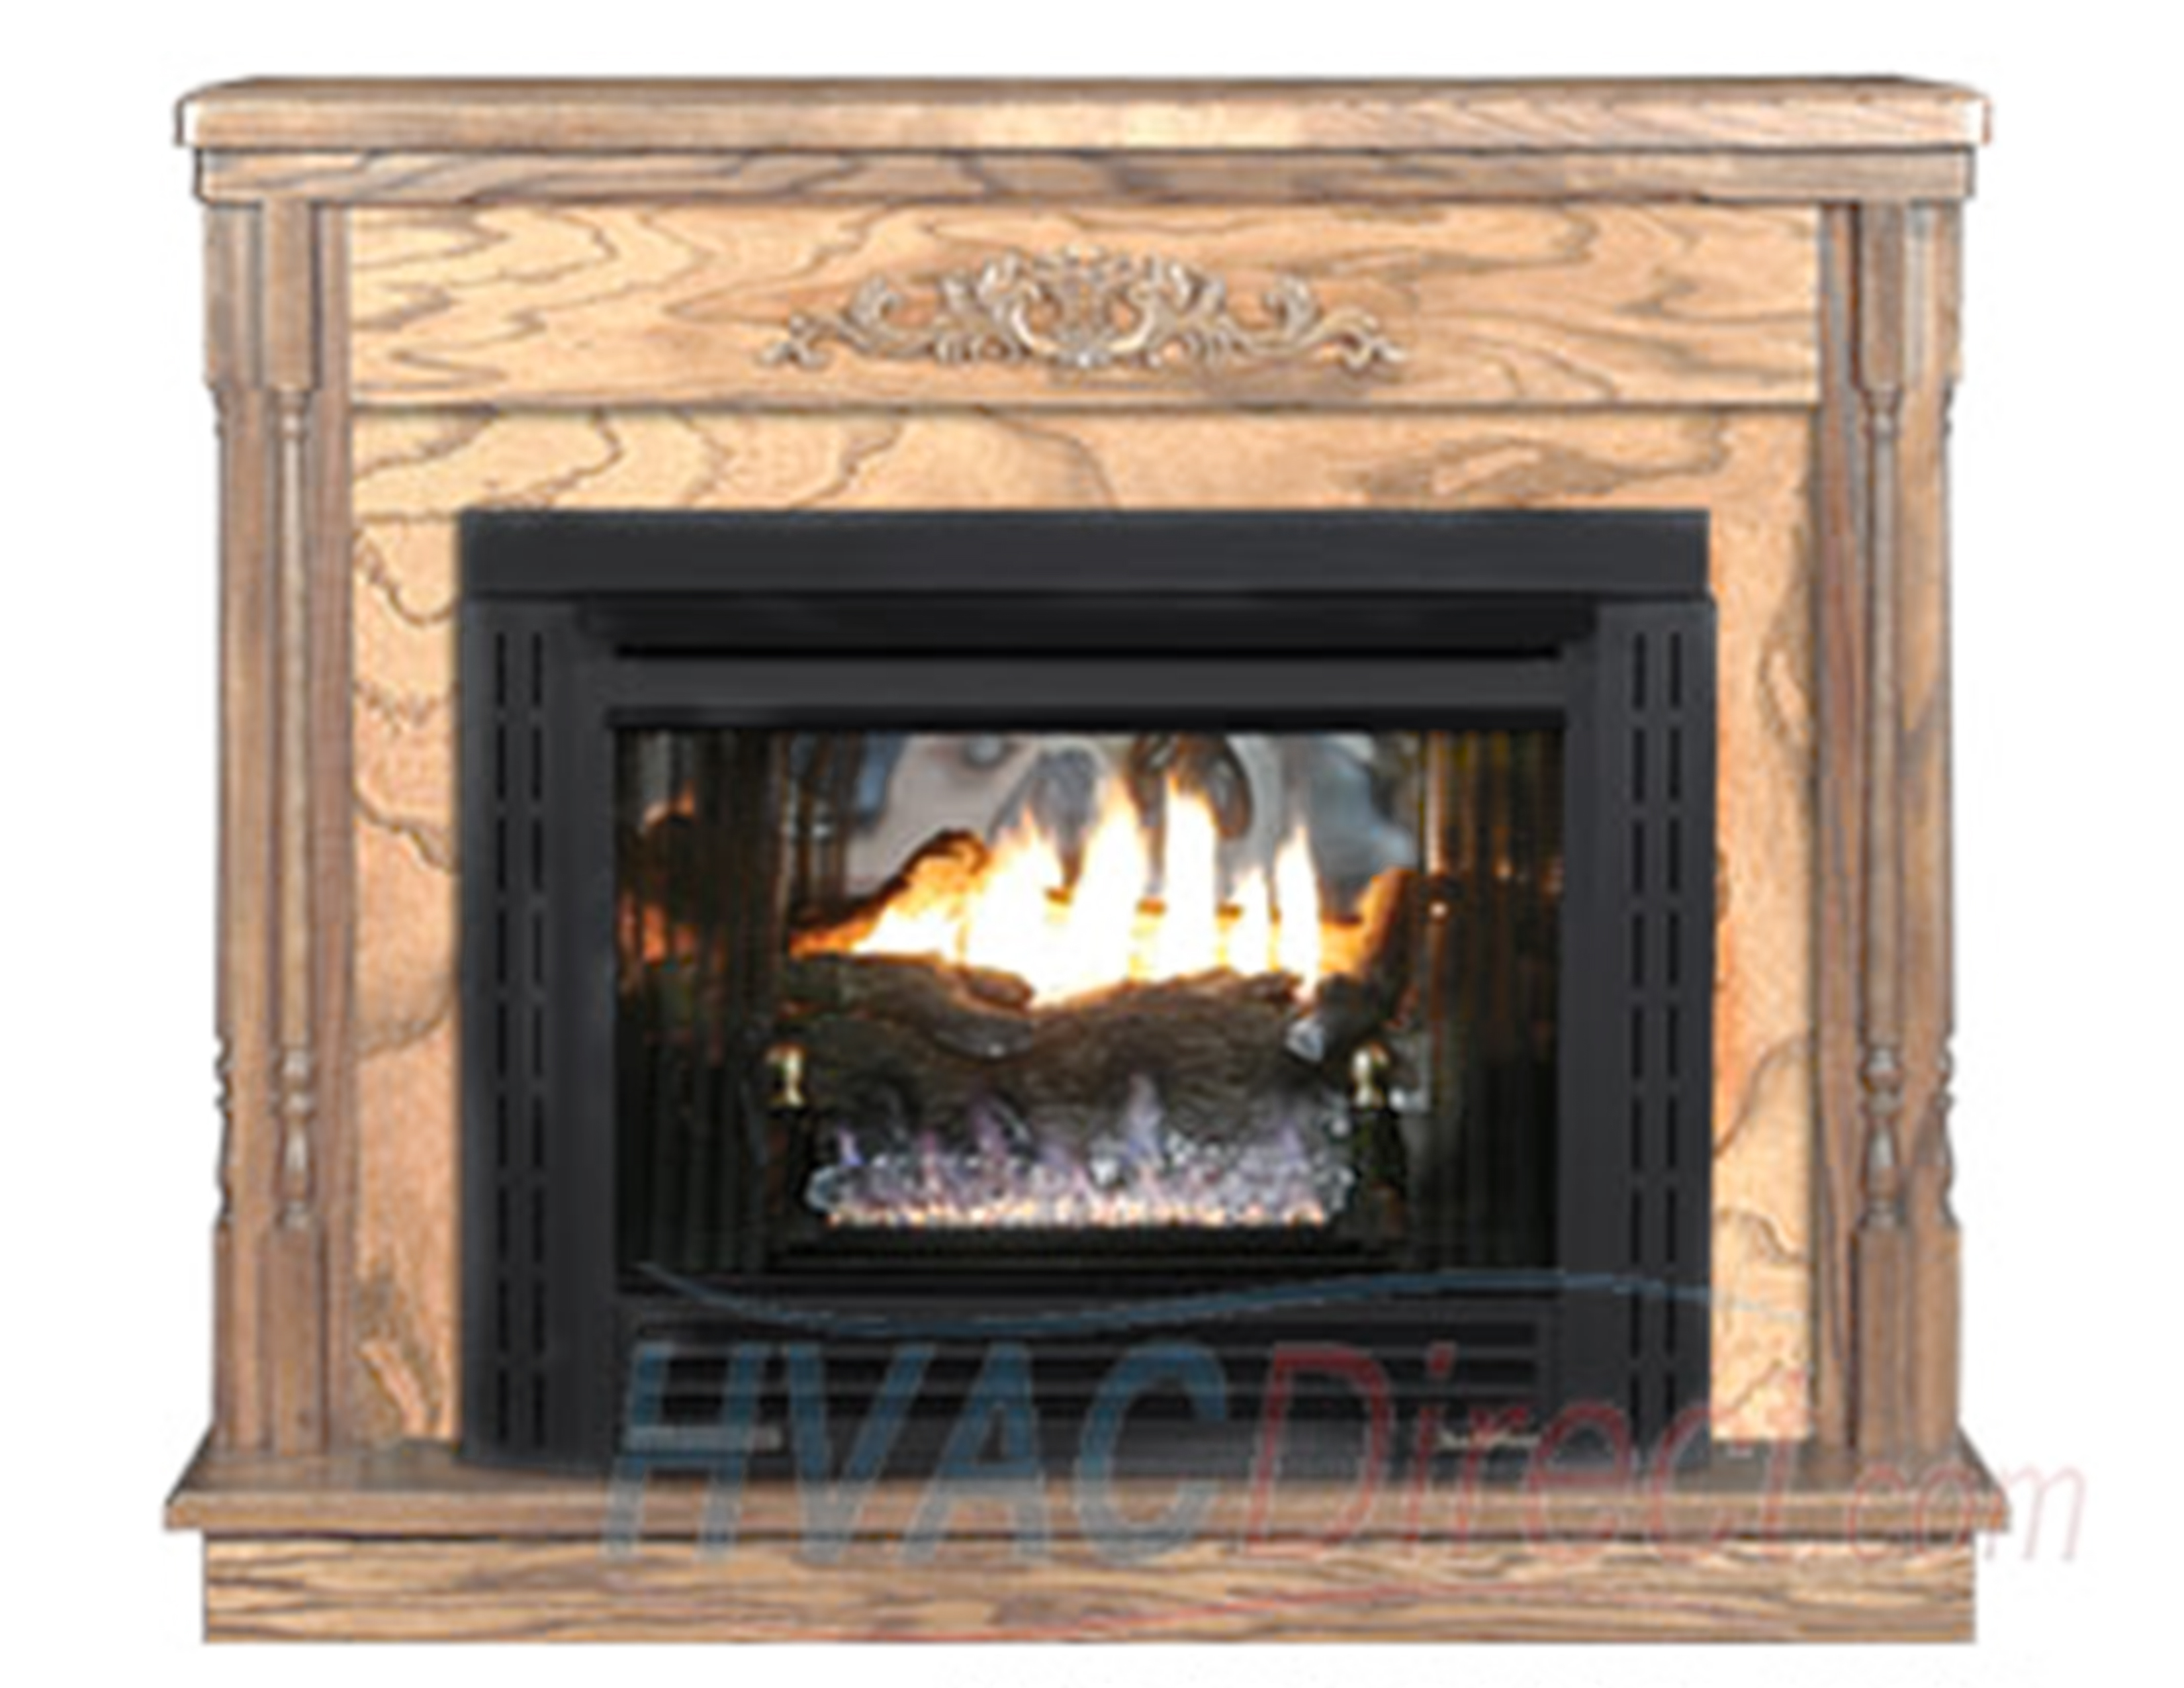 Cheap Gas Fireplace Inserts Unique Buck Stove Model 34zc Zero Clearance Vent Free Gas Fireplace